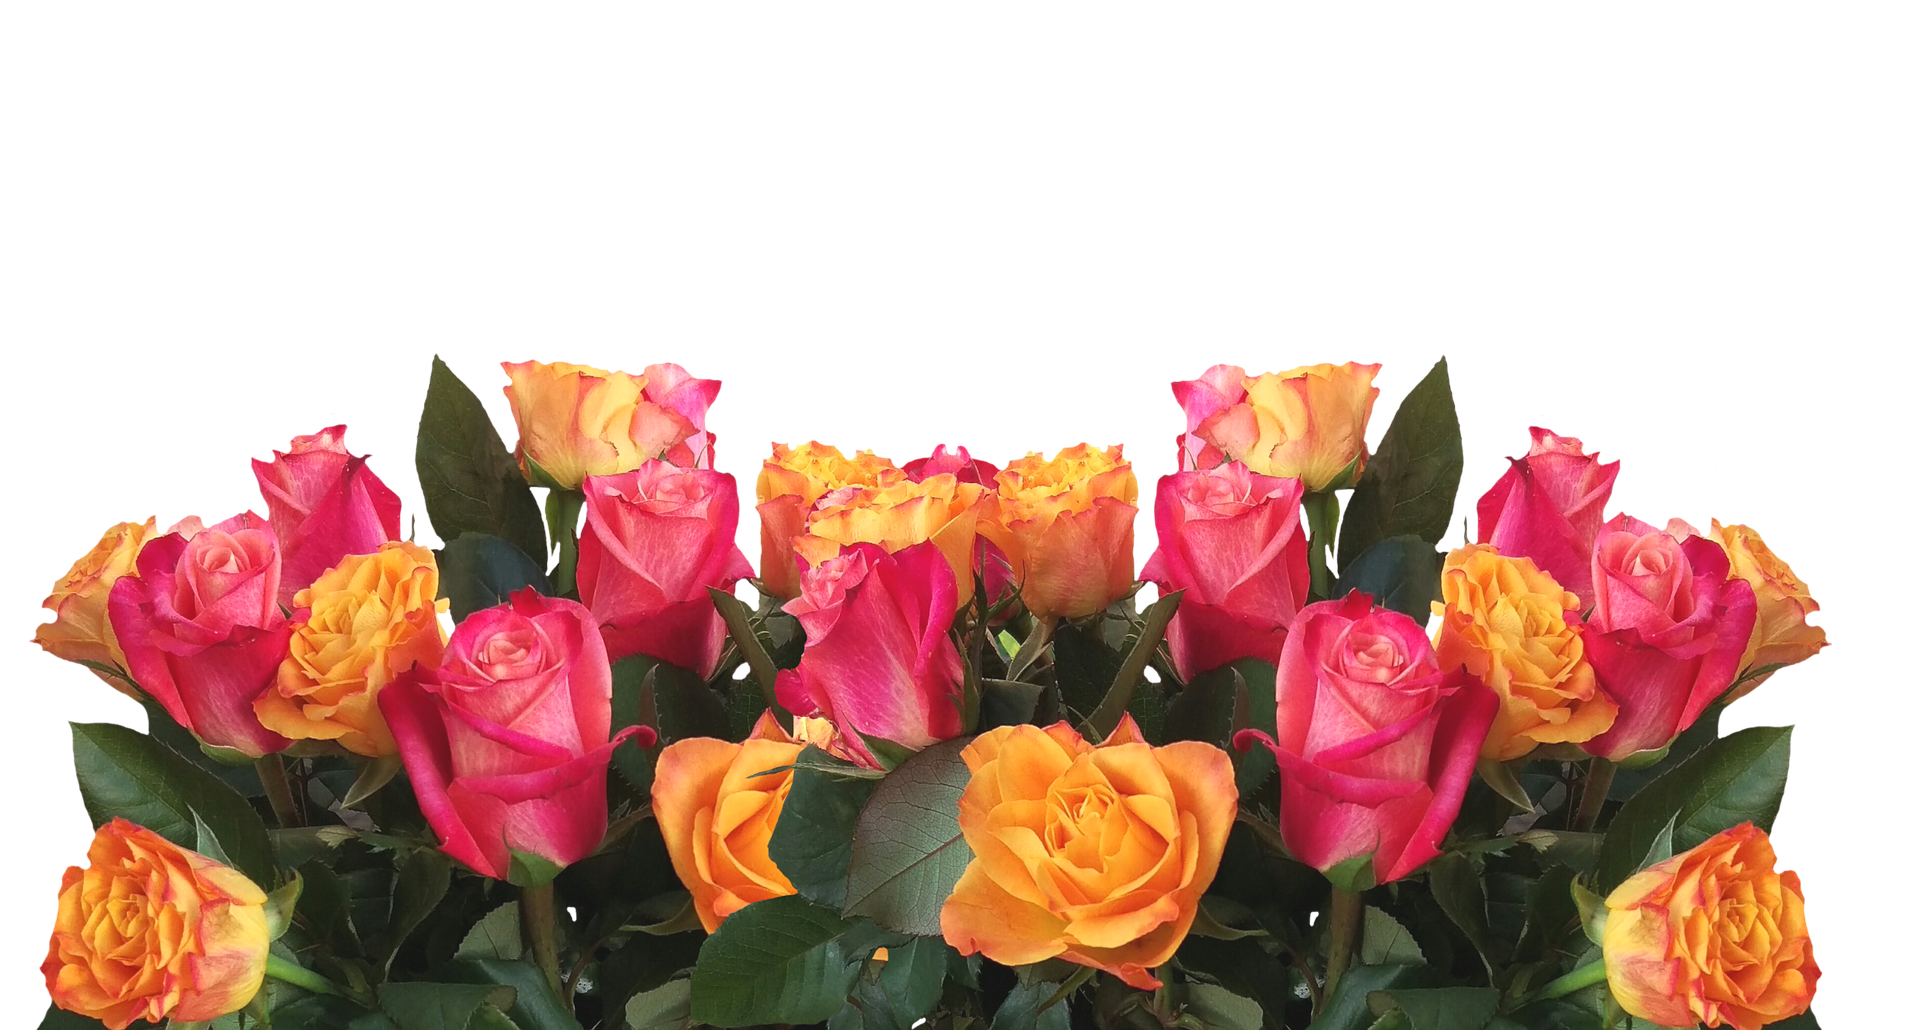 A Group Of Pink And Yellow Roses